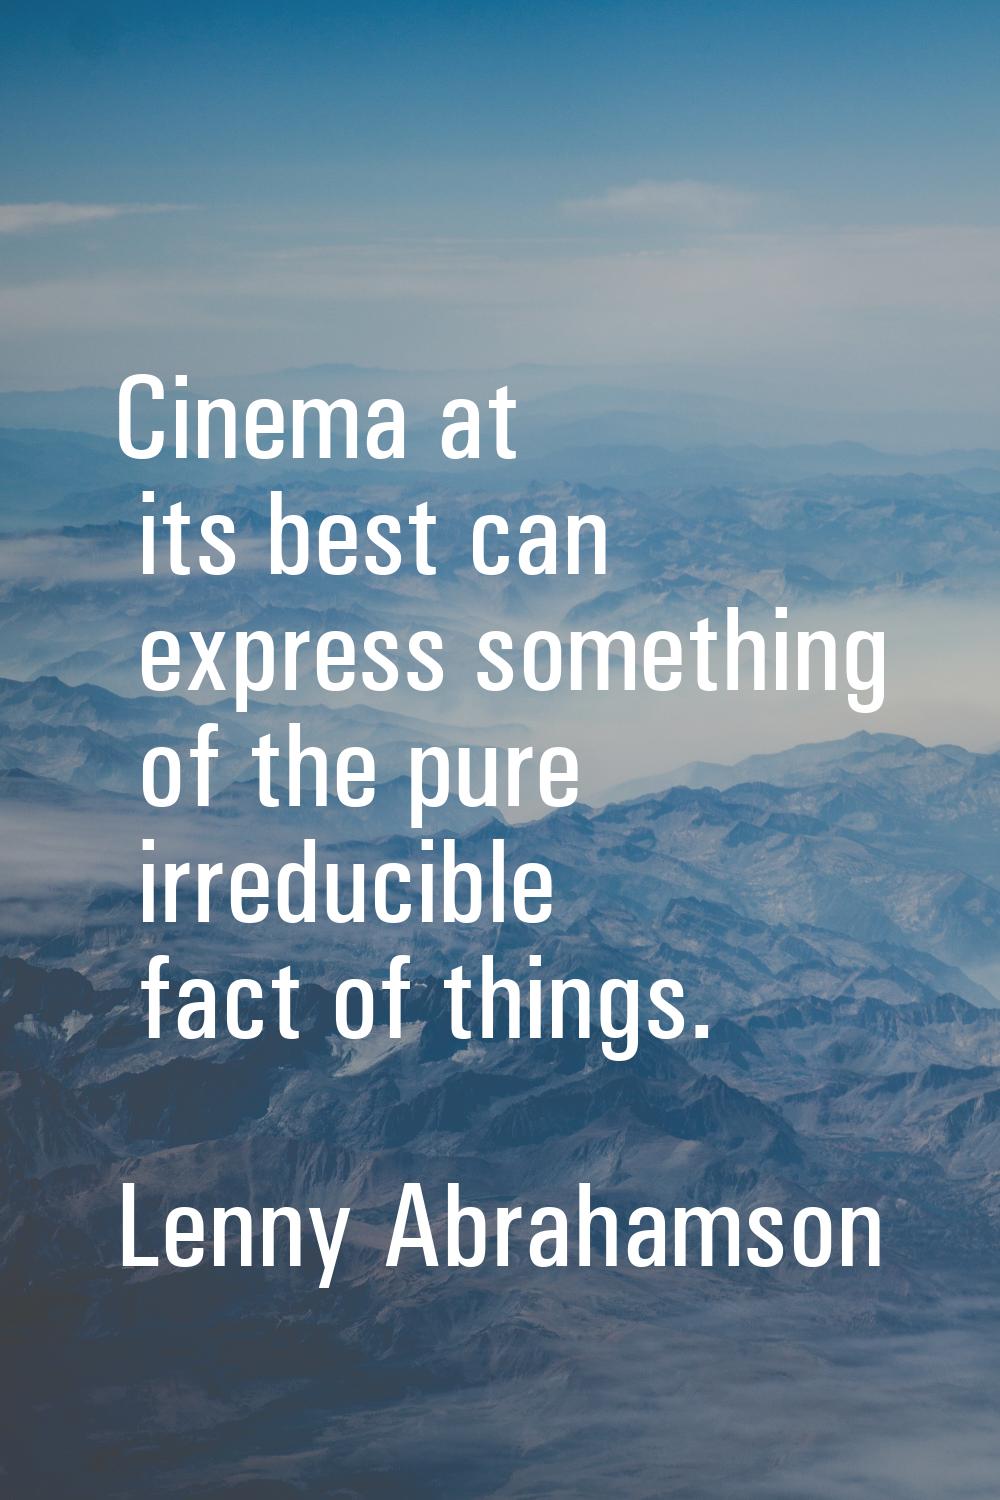 Cinema at its best can express something of the pure irreducible fact of things.